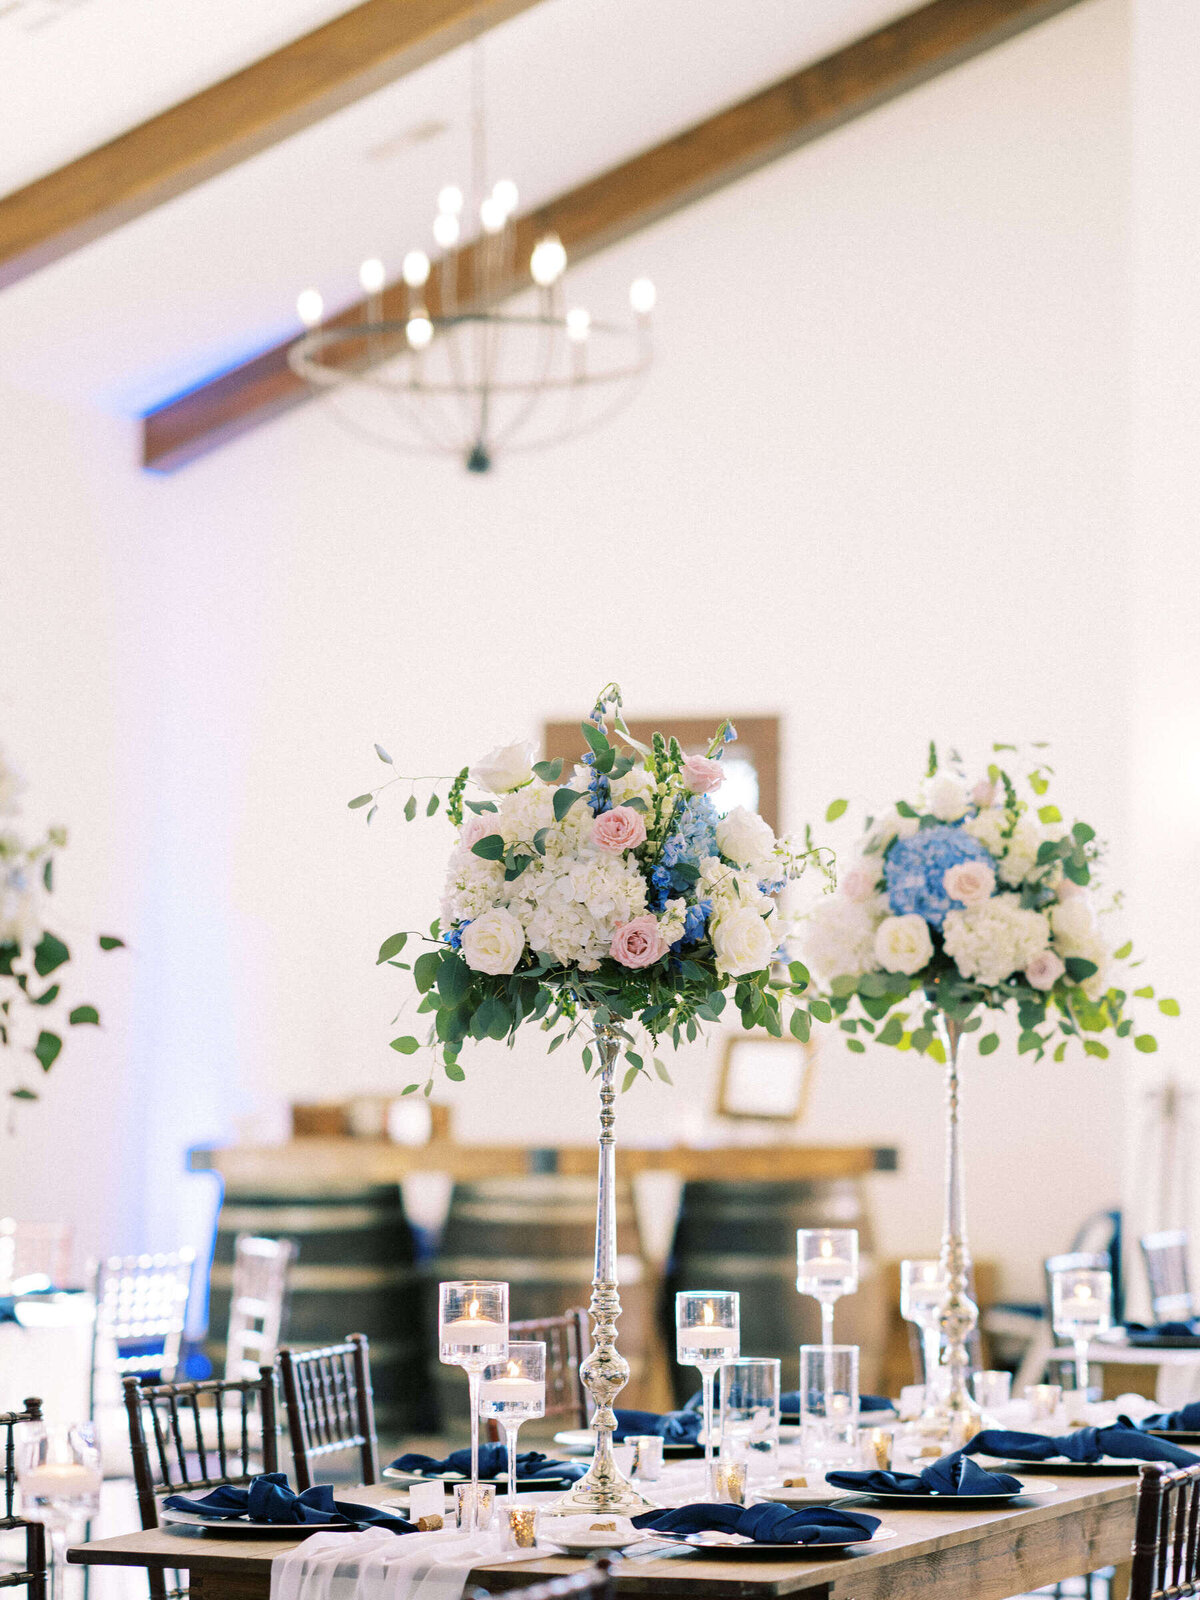 Spring table settings and bouquets at central Texas wedding